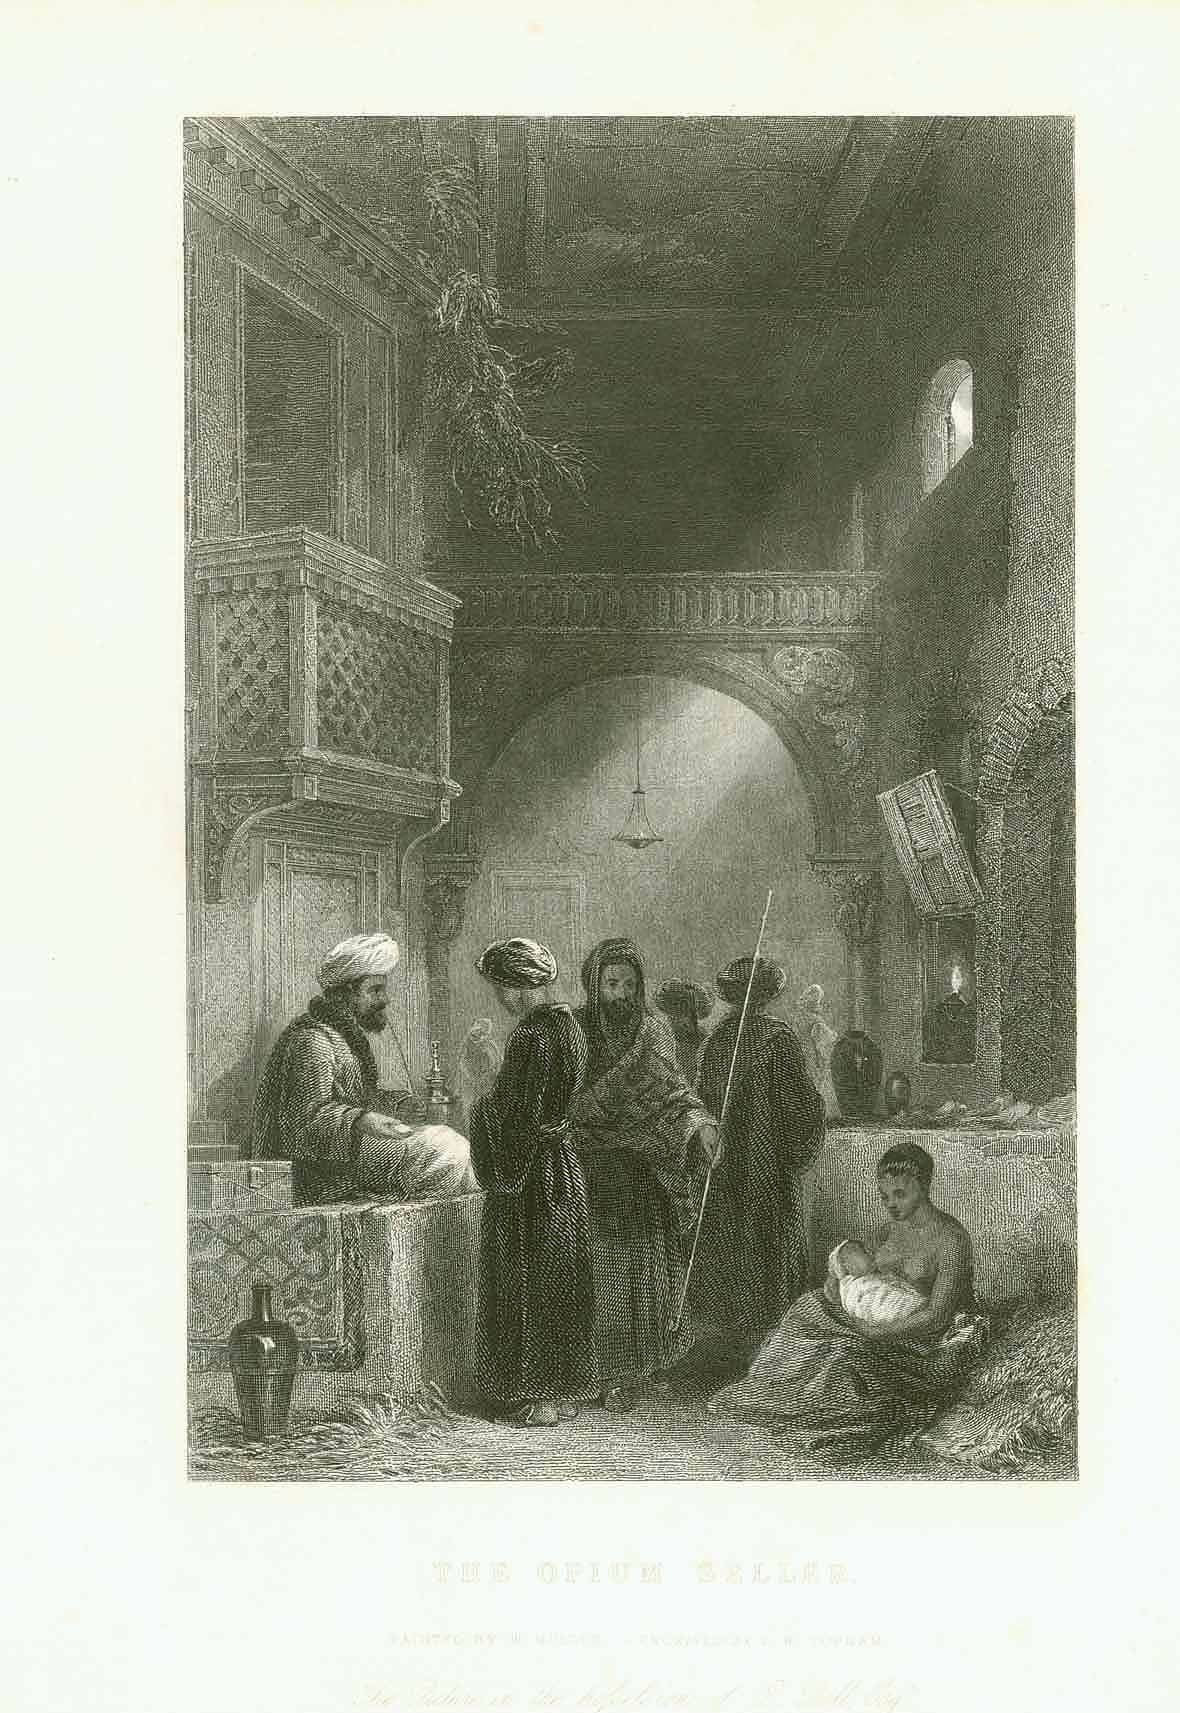 The Opium Seller  Steel engraving by W. Topham after W. Mueller, ca 1850.  Original antique print , interior design, wall decoration, ideas, idea, gift ideas, present, vintage, charming, special, decoration, home interior, living room design